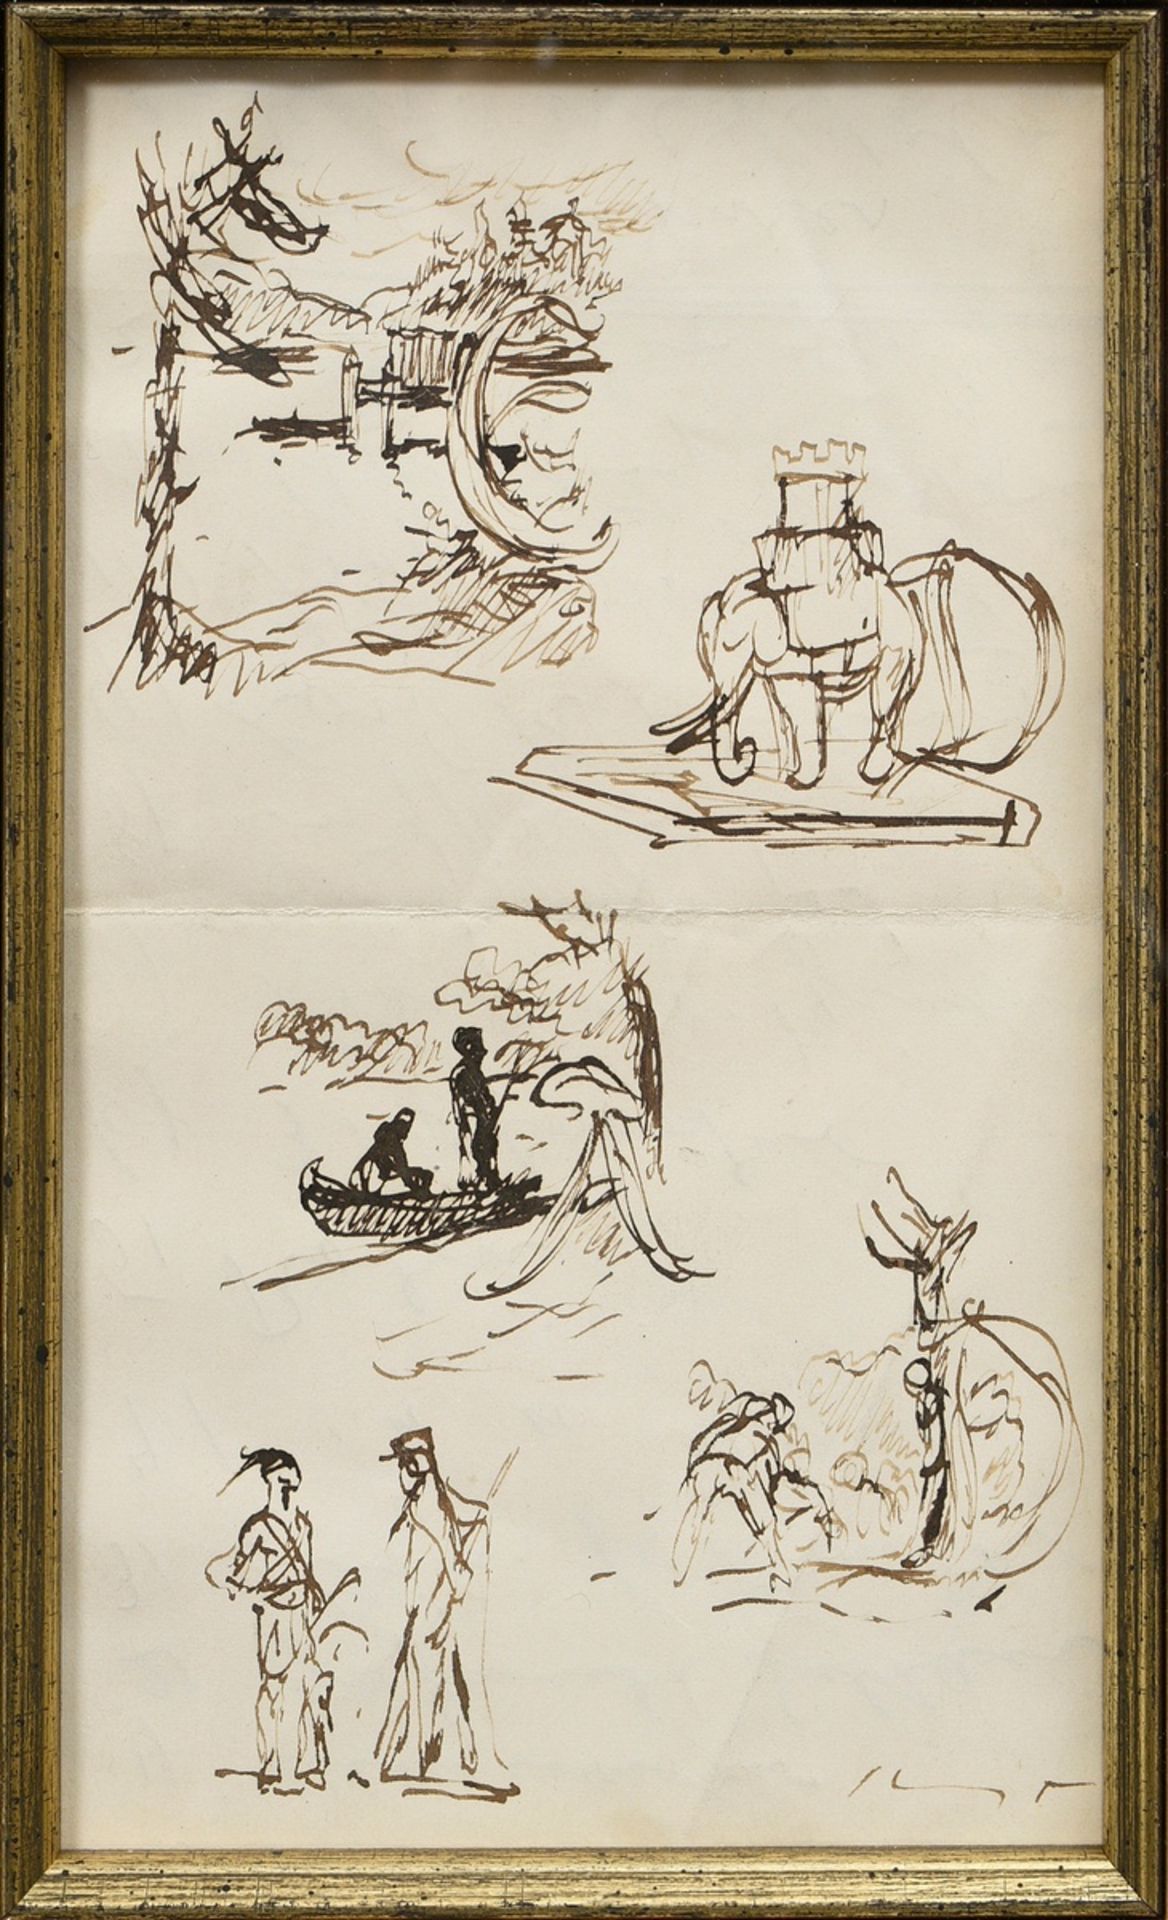 Slevogt, Max (1868-1932) "Vignette Studies", pen-and-ink drawing, sign. on the lower right, inscr. 